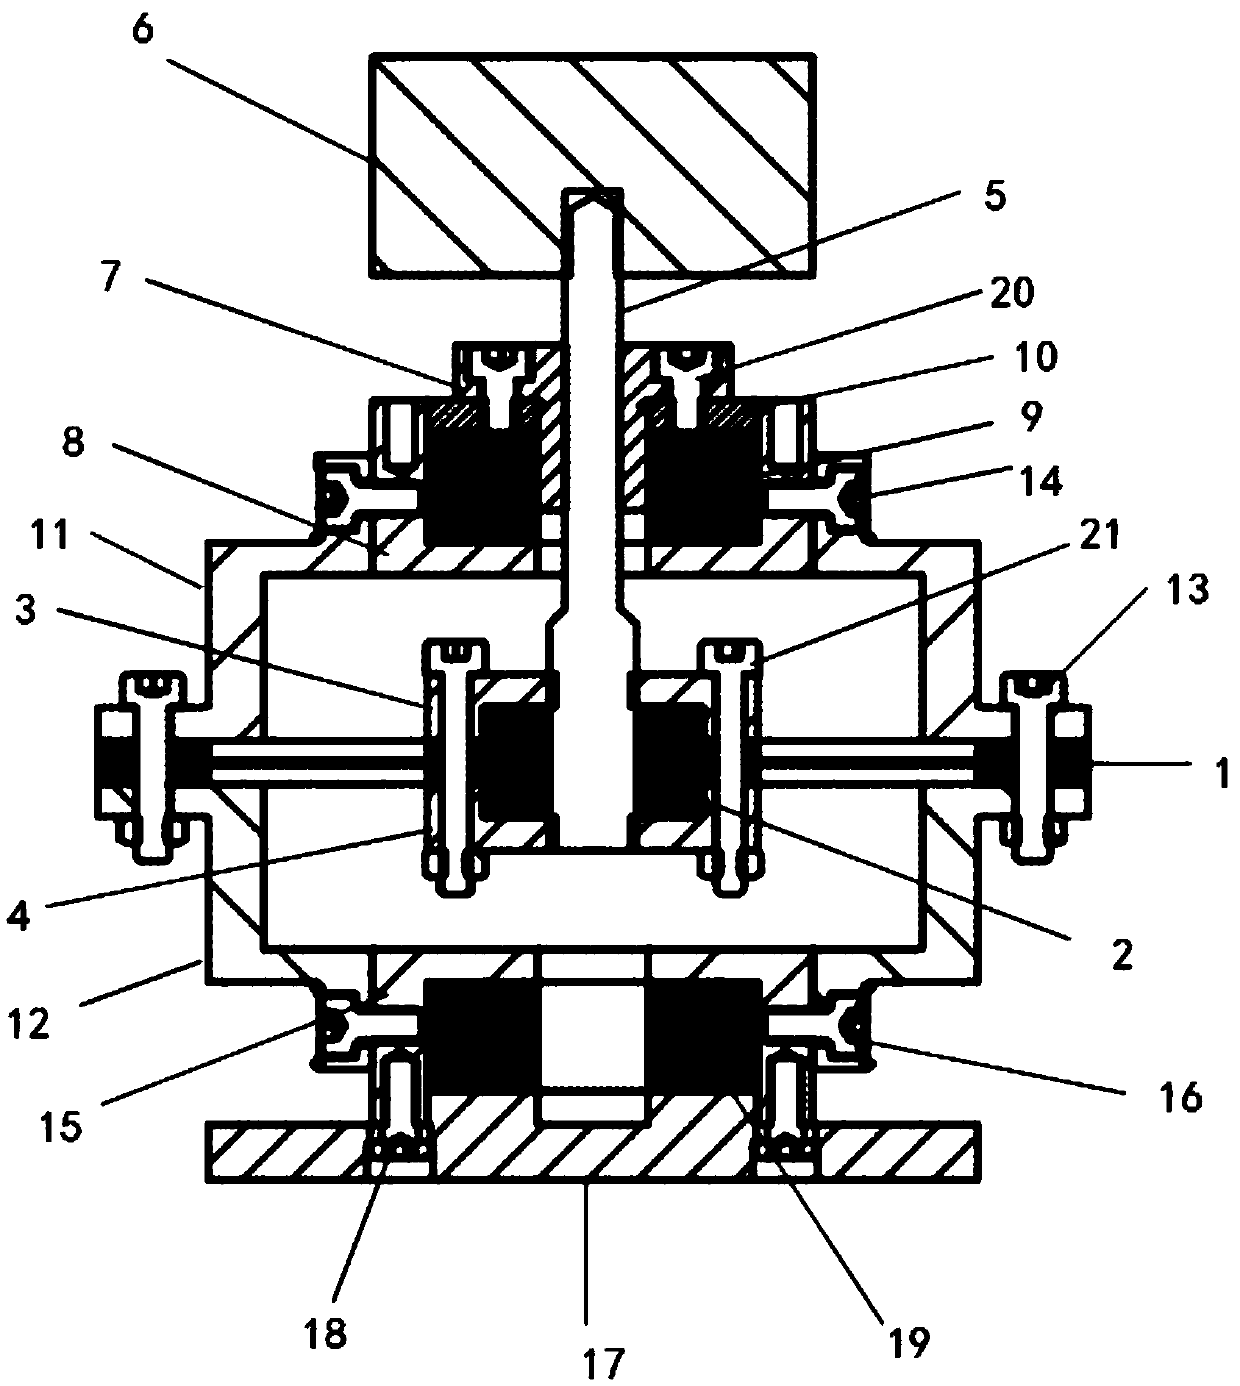 A Variable Stiffness Vibration Isolator Based on Multilayer Dielectric Elastomer Film